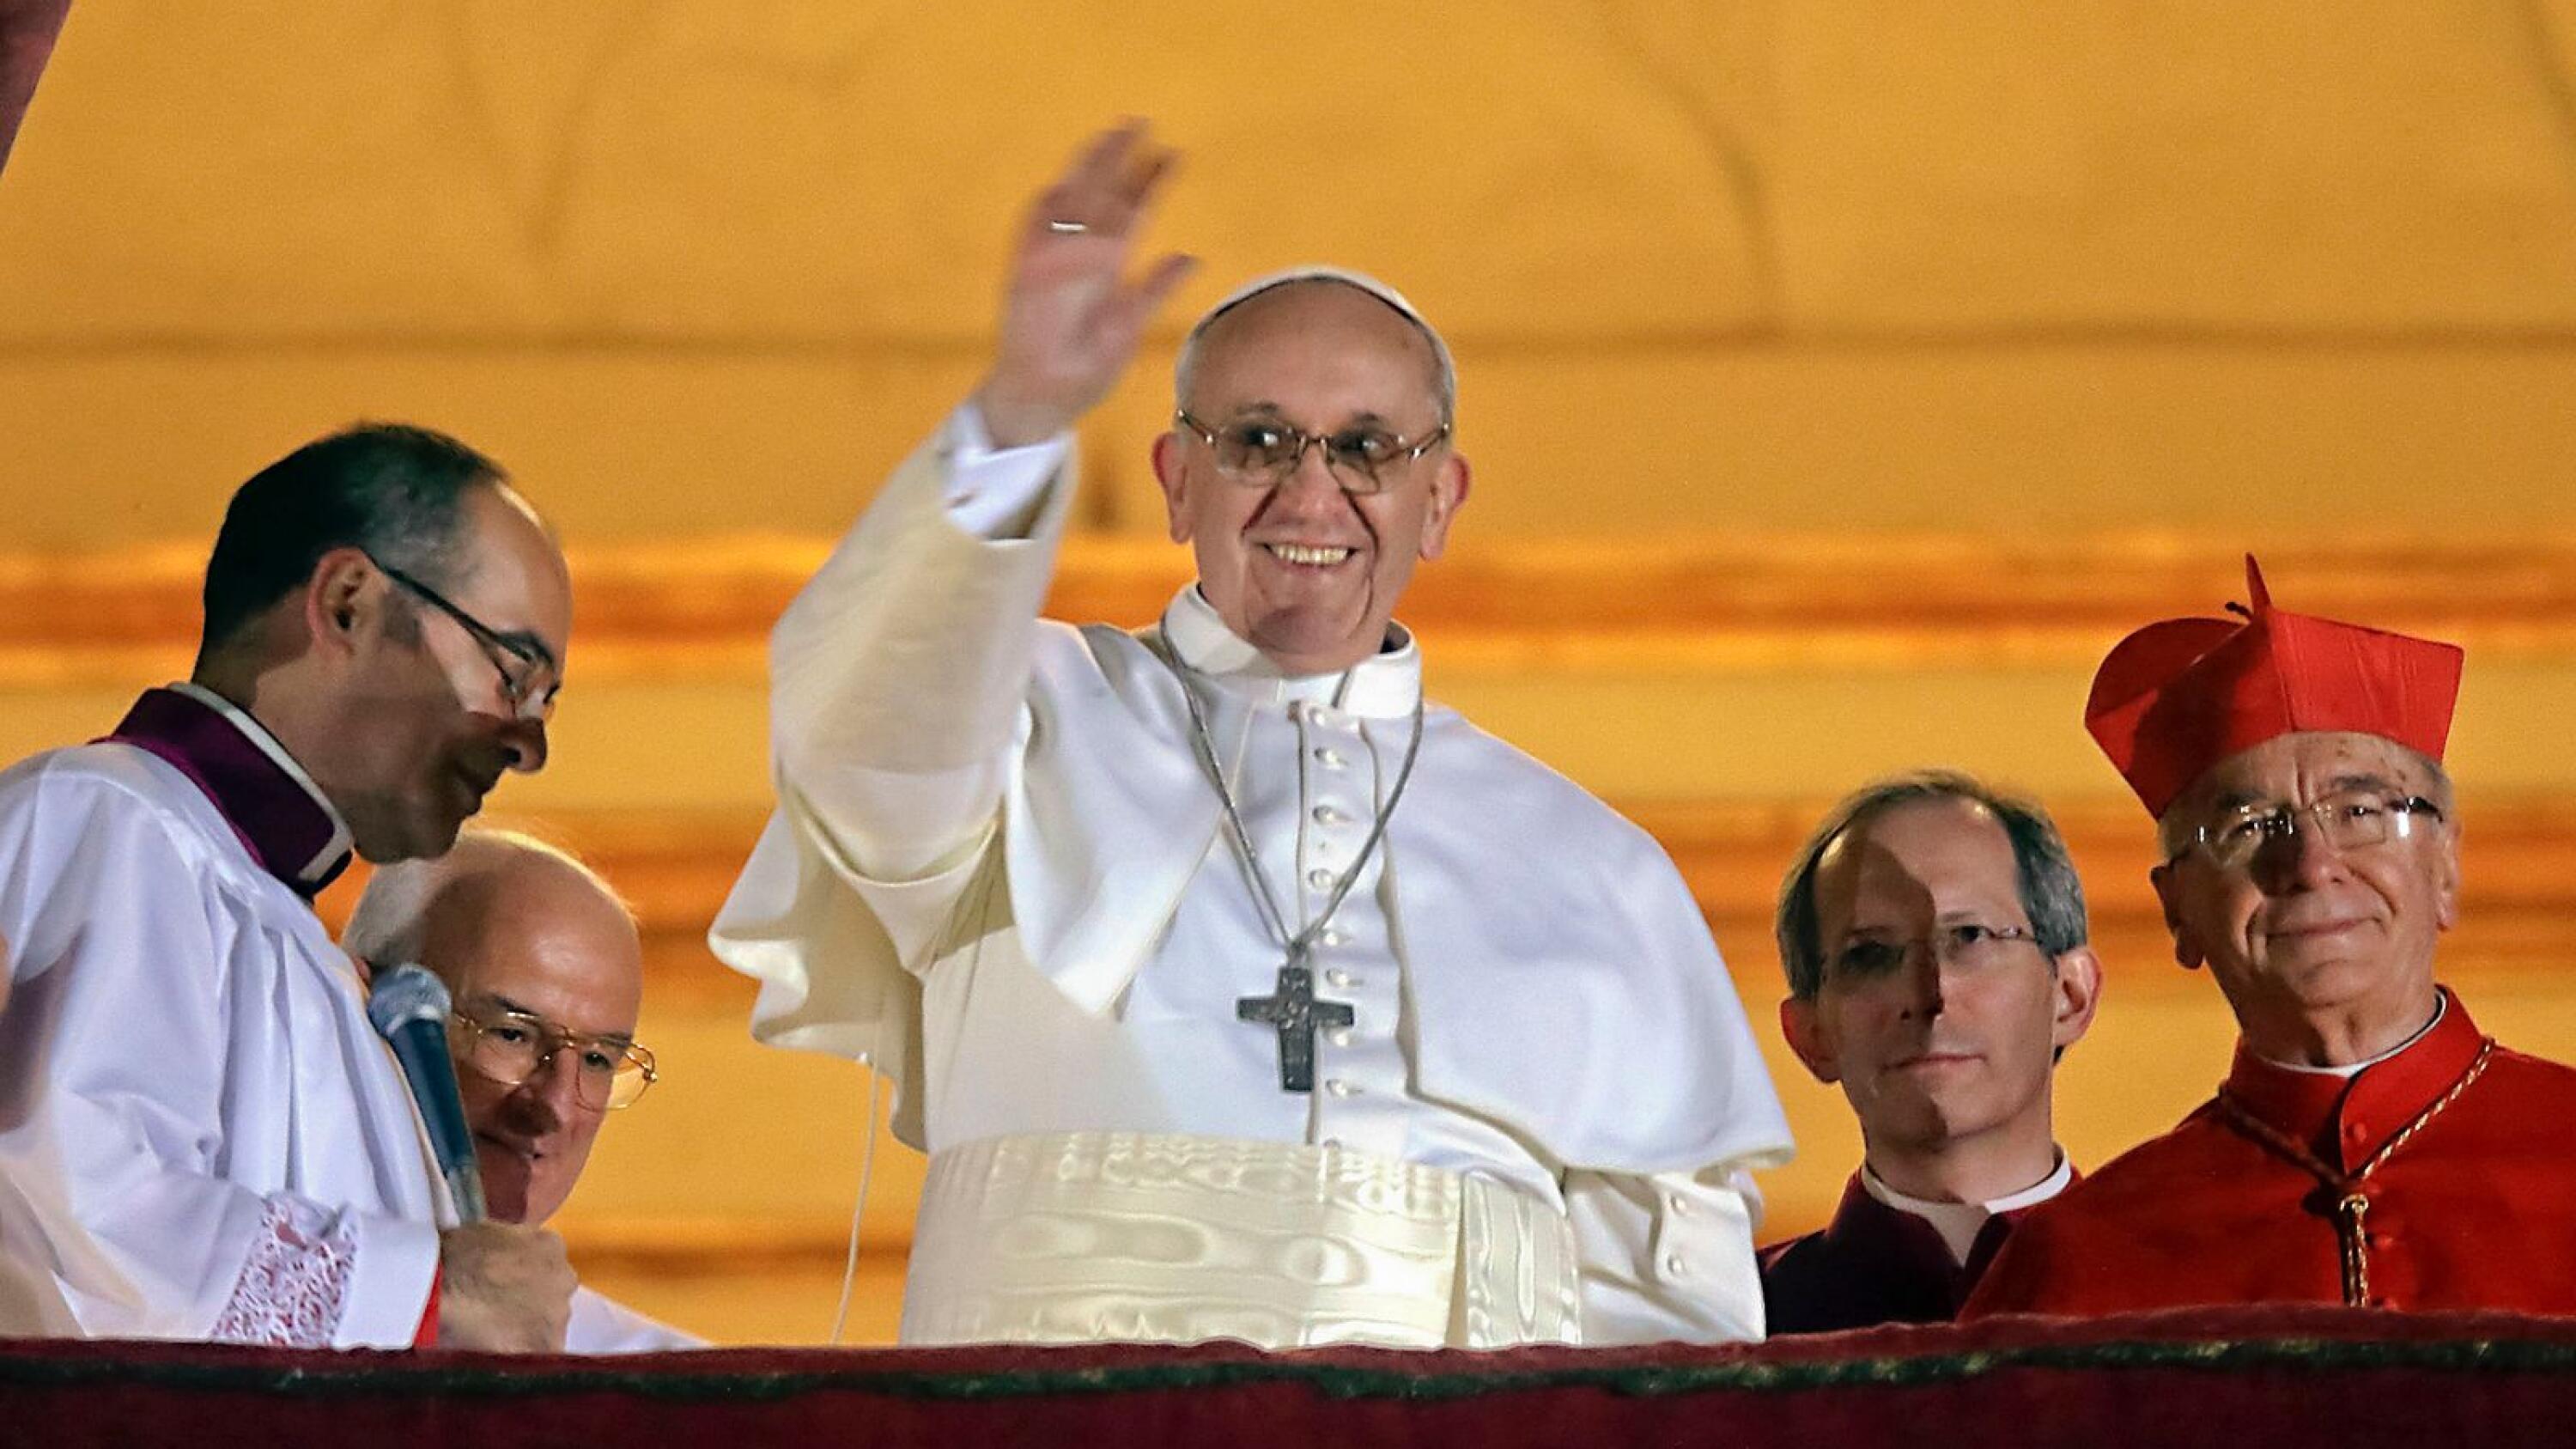 Francis at 10 years: He has made his but early hope has faded